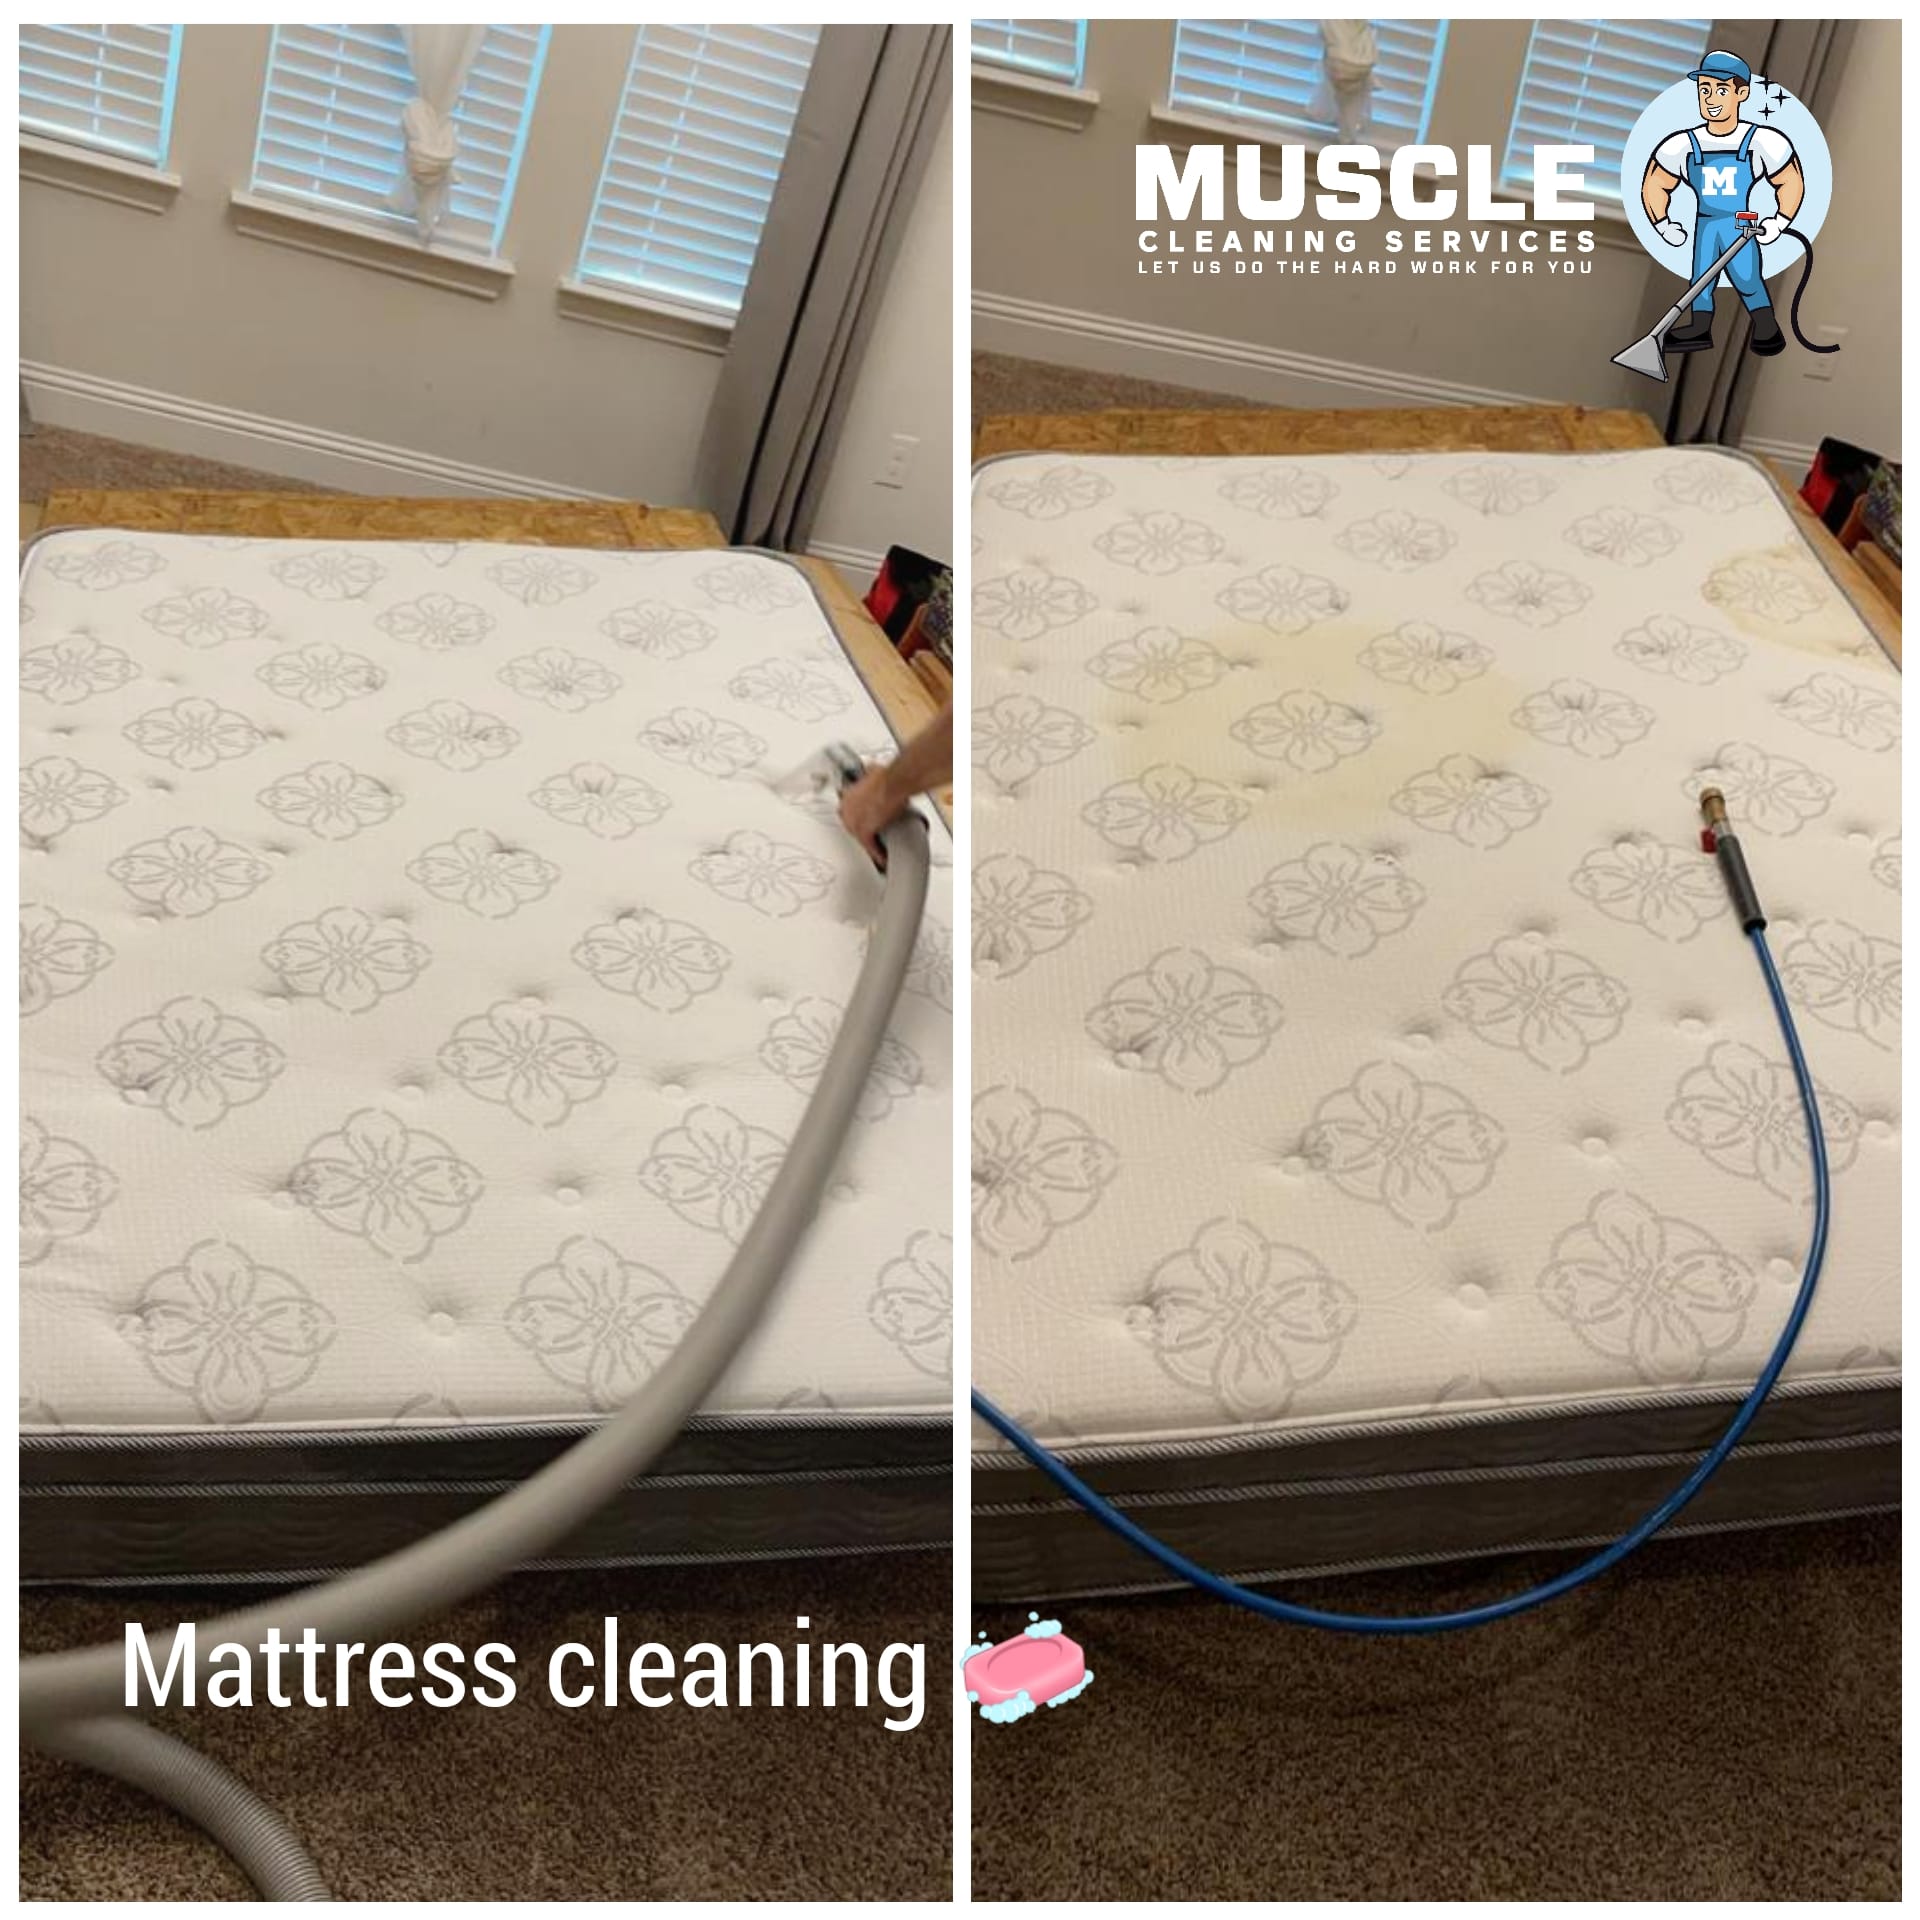 Muscle Cleaning Services - Mattress Cleaning